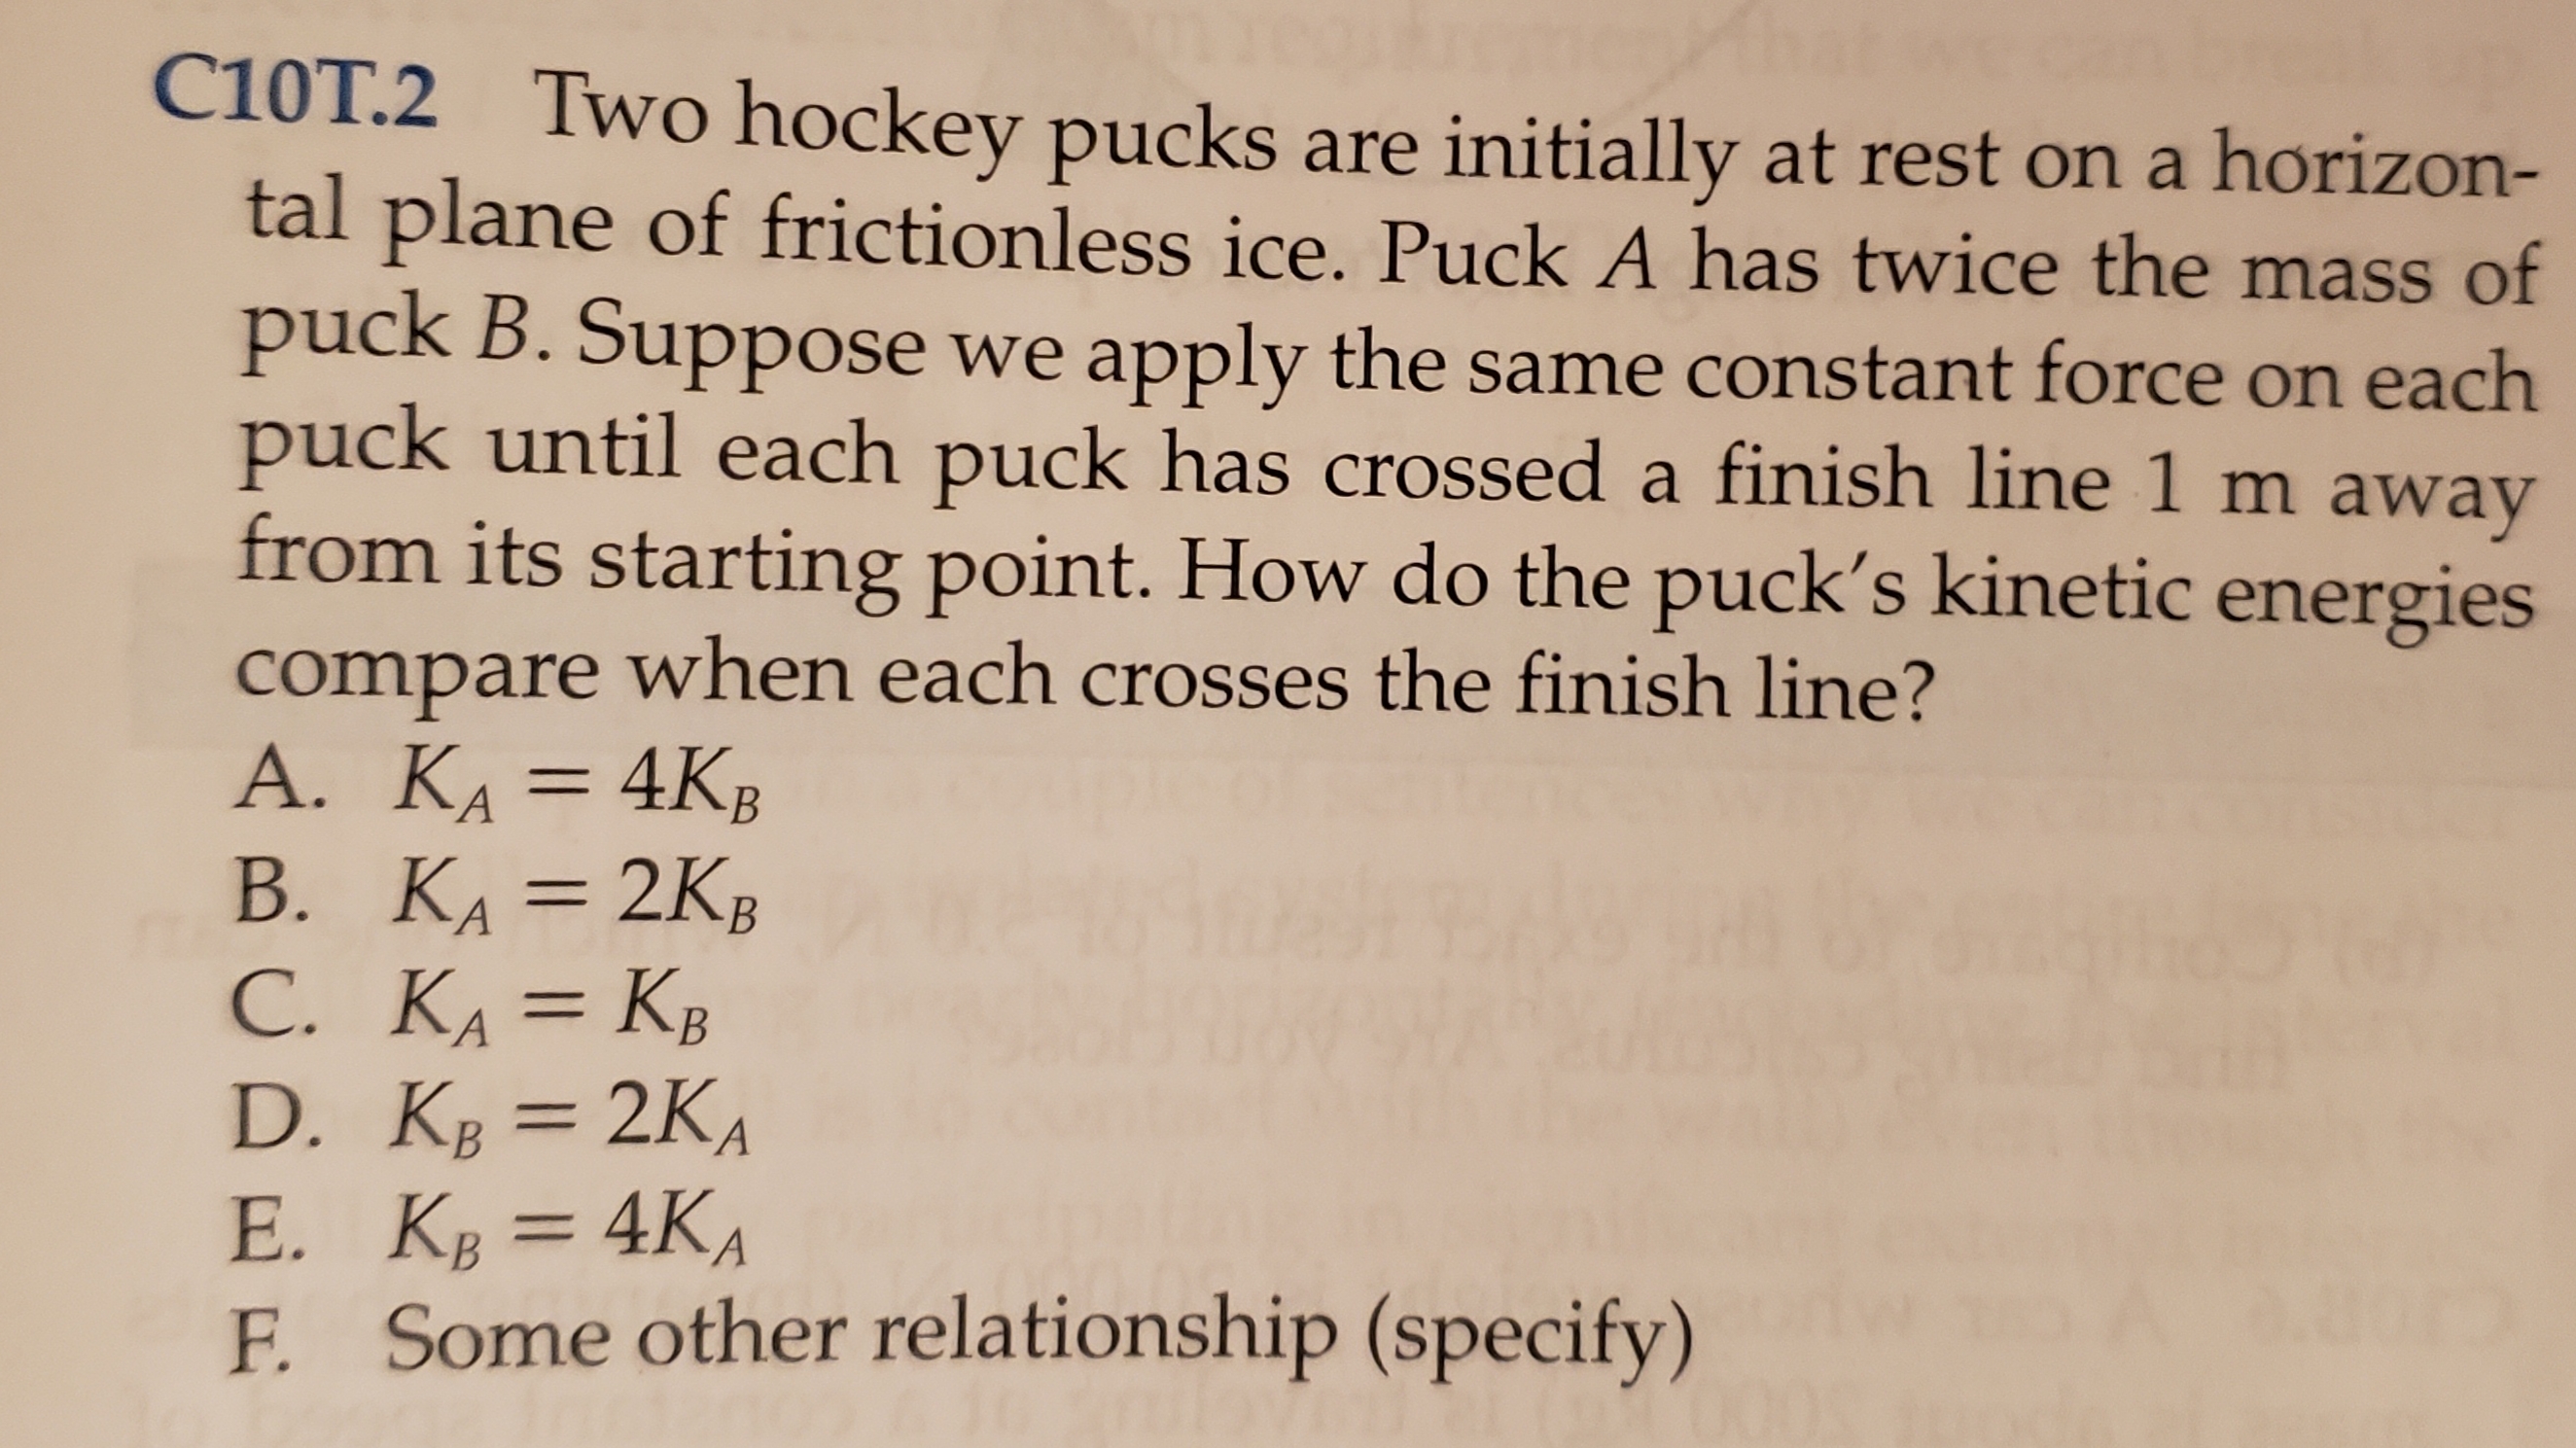 C10T.2 Two hockey pucks are initially at rest on a horizon-
tal plane of frictionless ice. Puck A has twice the mass of
puck B. Suppose
puck until each puck has crossed a finish line 1 m away
from its starting point. How do the puck's kinetic energies
we apply the same constant force on each
compare when each crosses the finish line?
A. KA= 4KB
В. КА — 2Кв
C. KA= KB
D. KB=2KA
Е. К, — 4КА
F. Some other relationship (specify)
В
= 4KA
